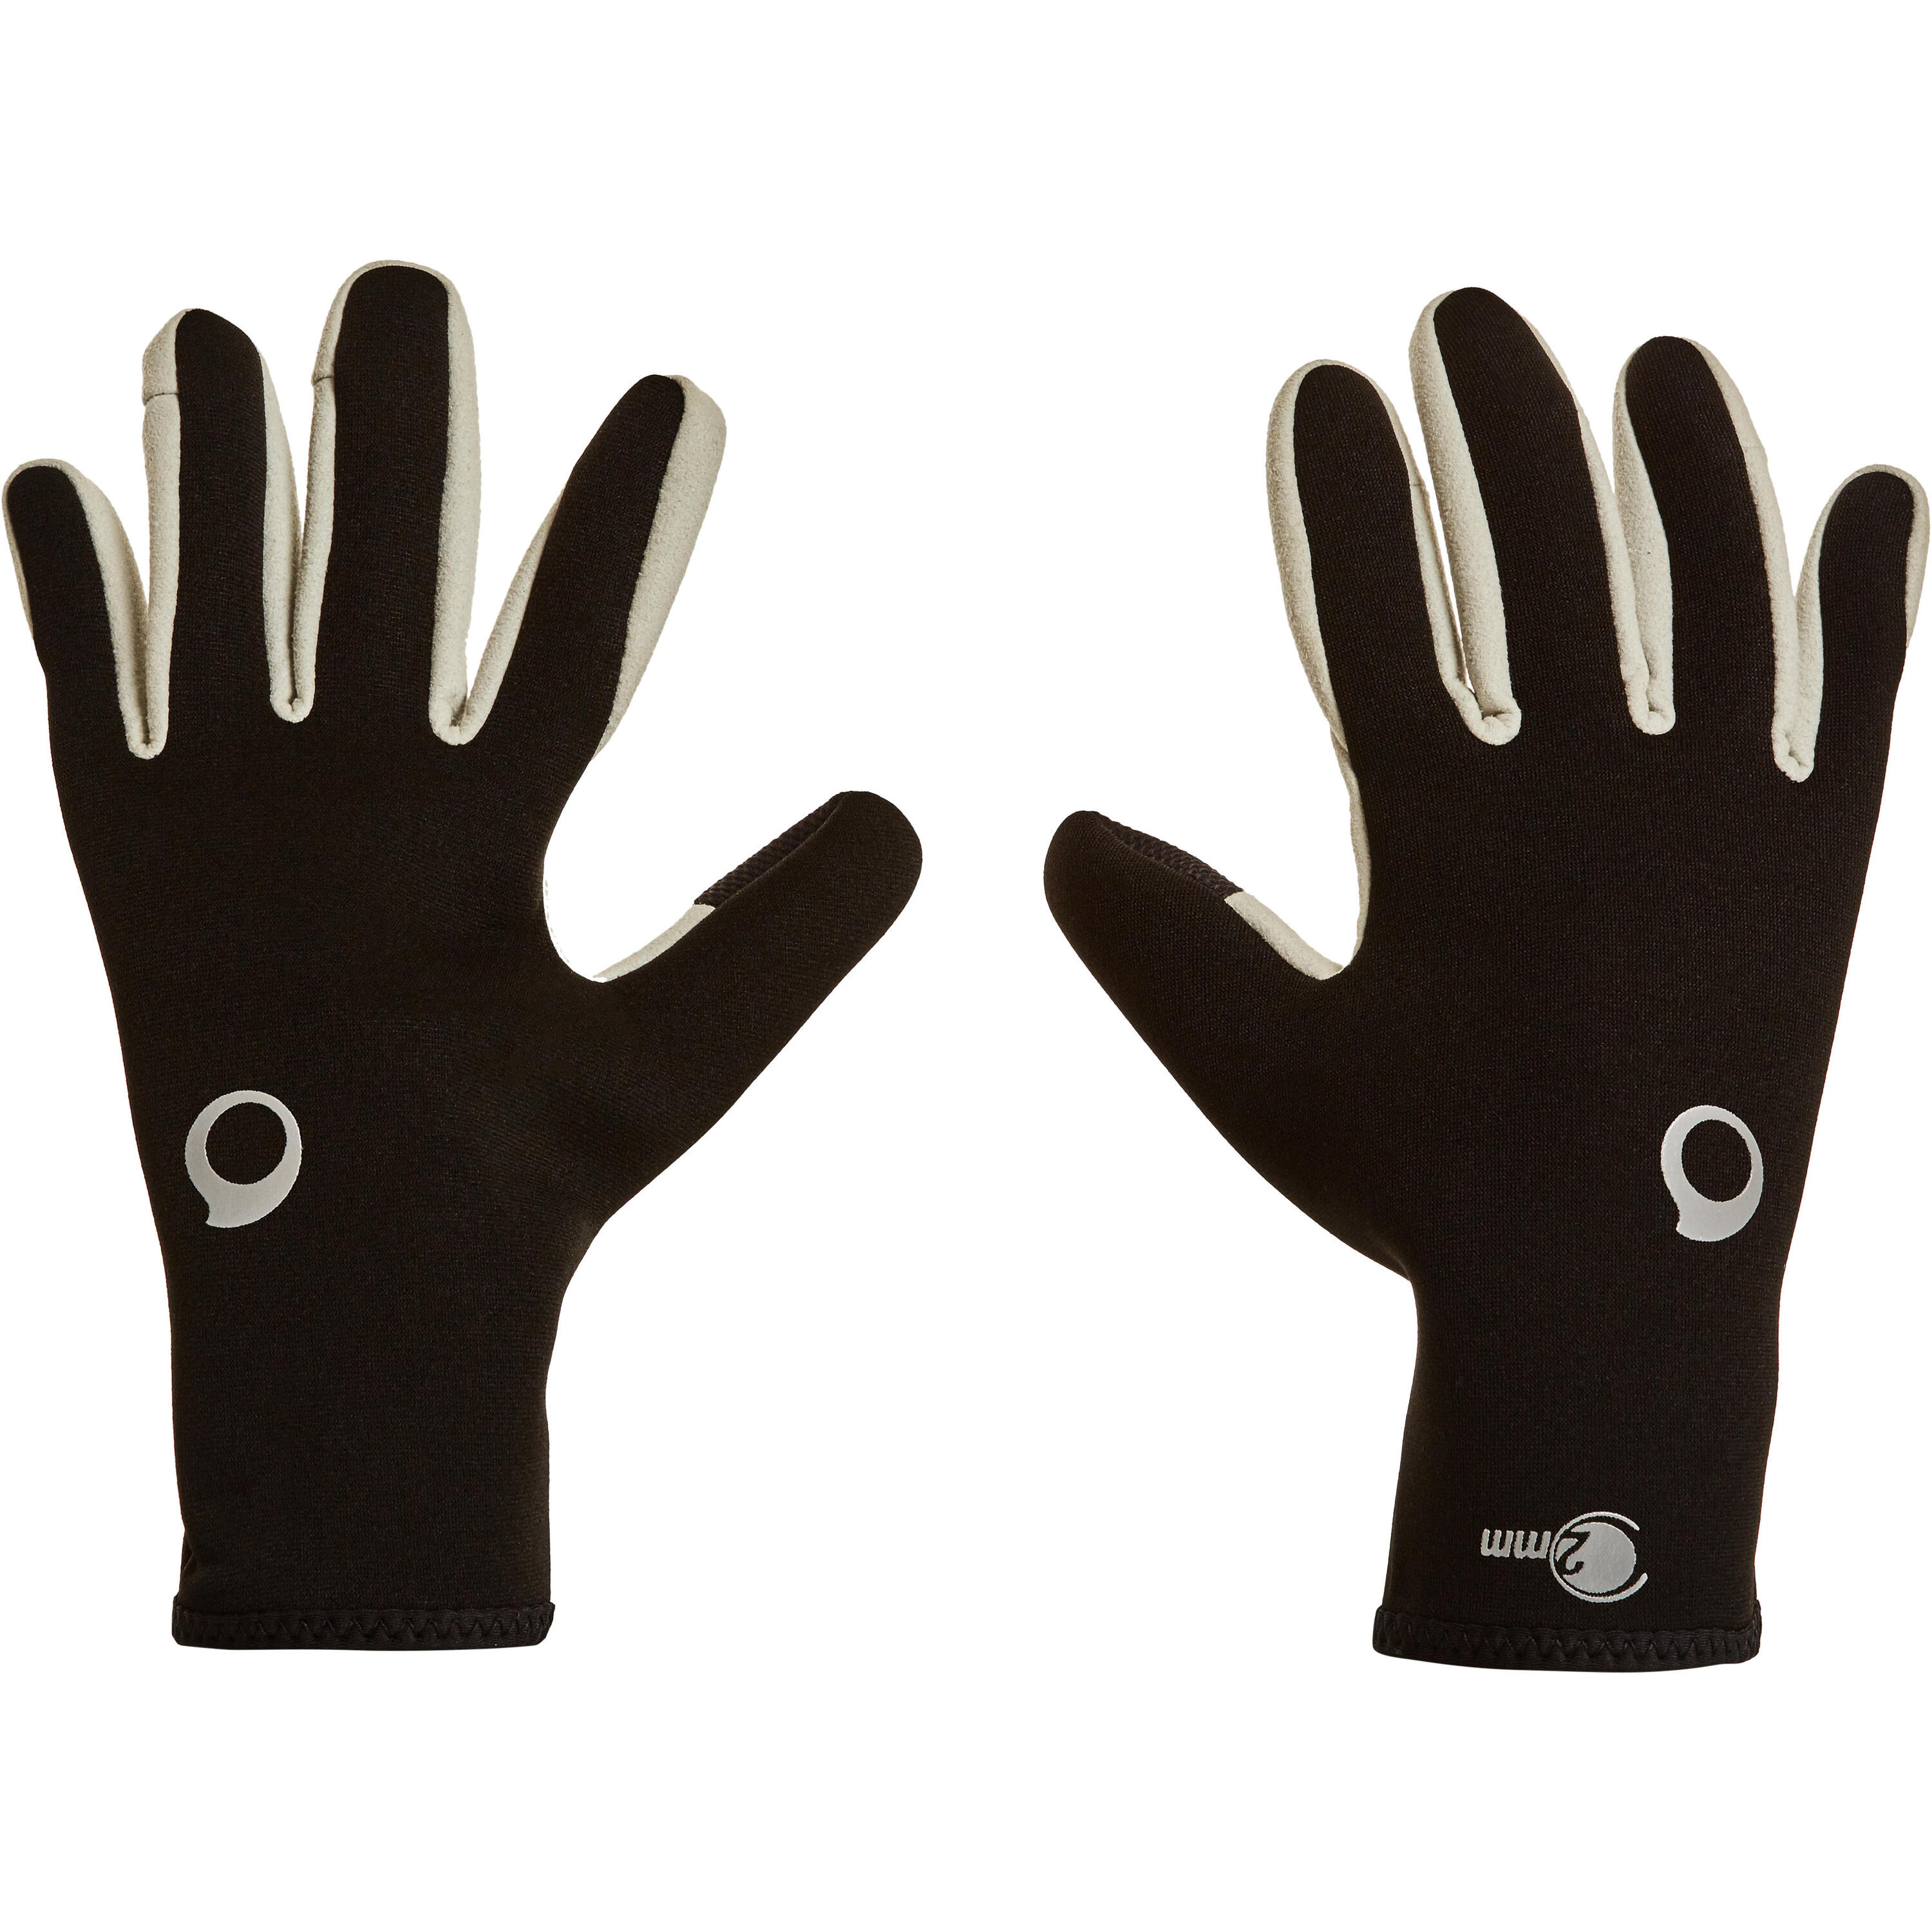 Supratex reinforced SPF 500 Spearfishing Gloves 2 mm 3/8